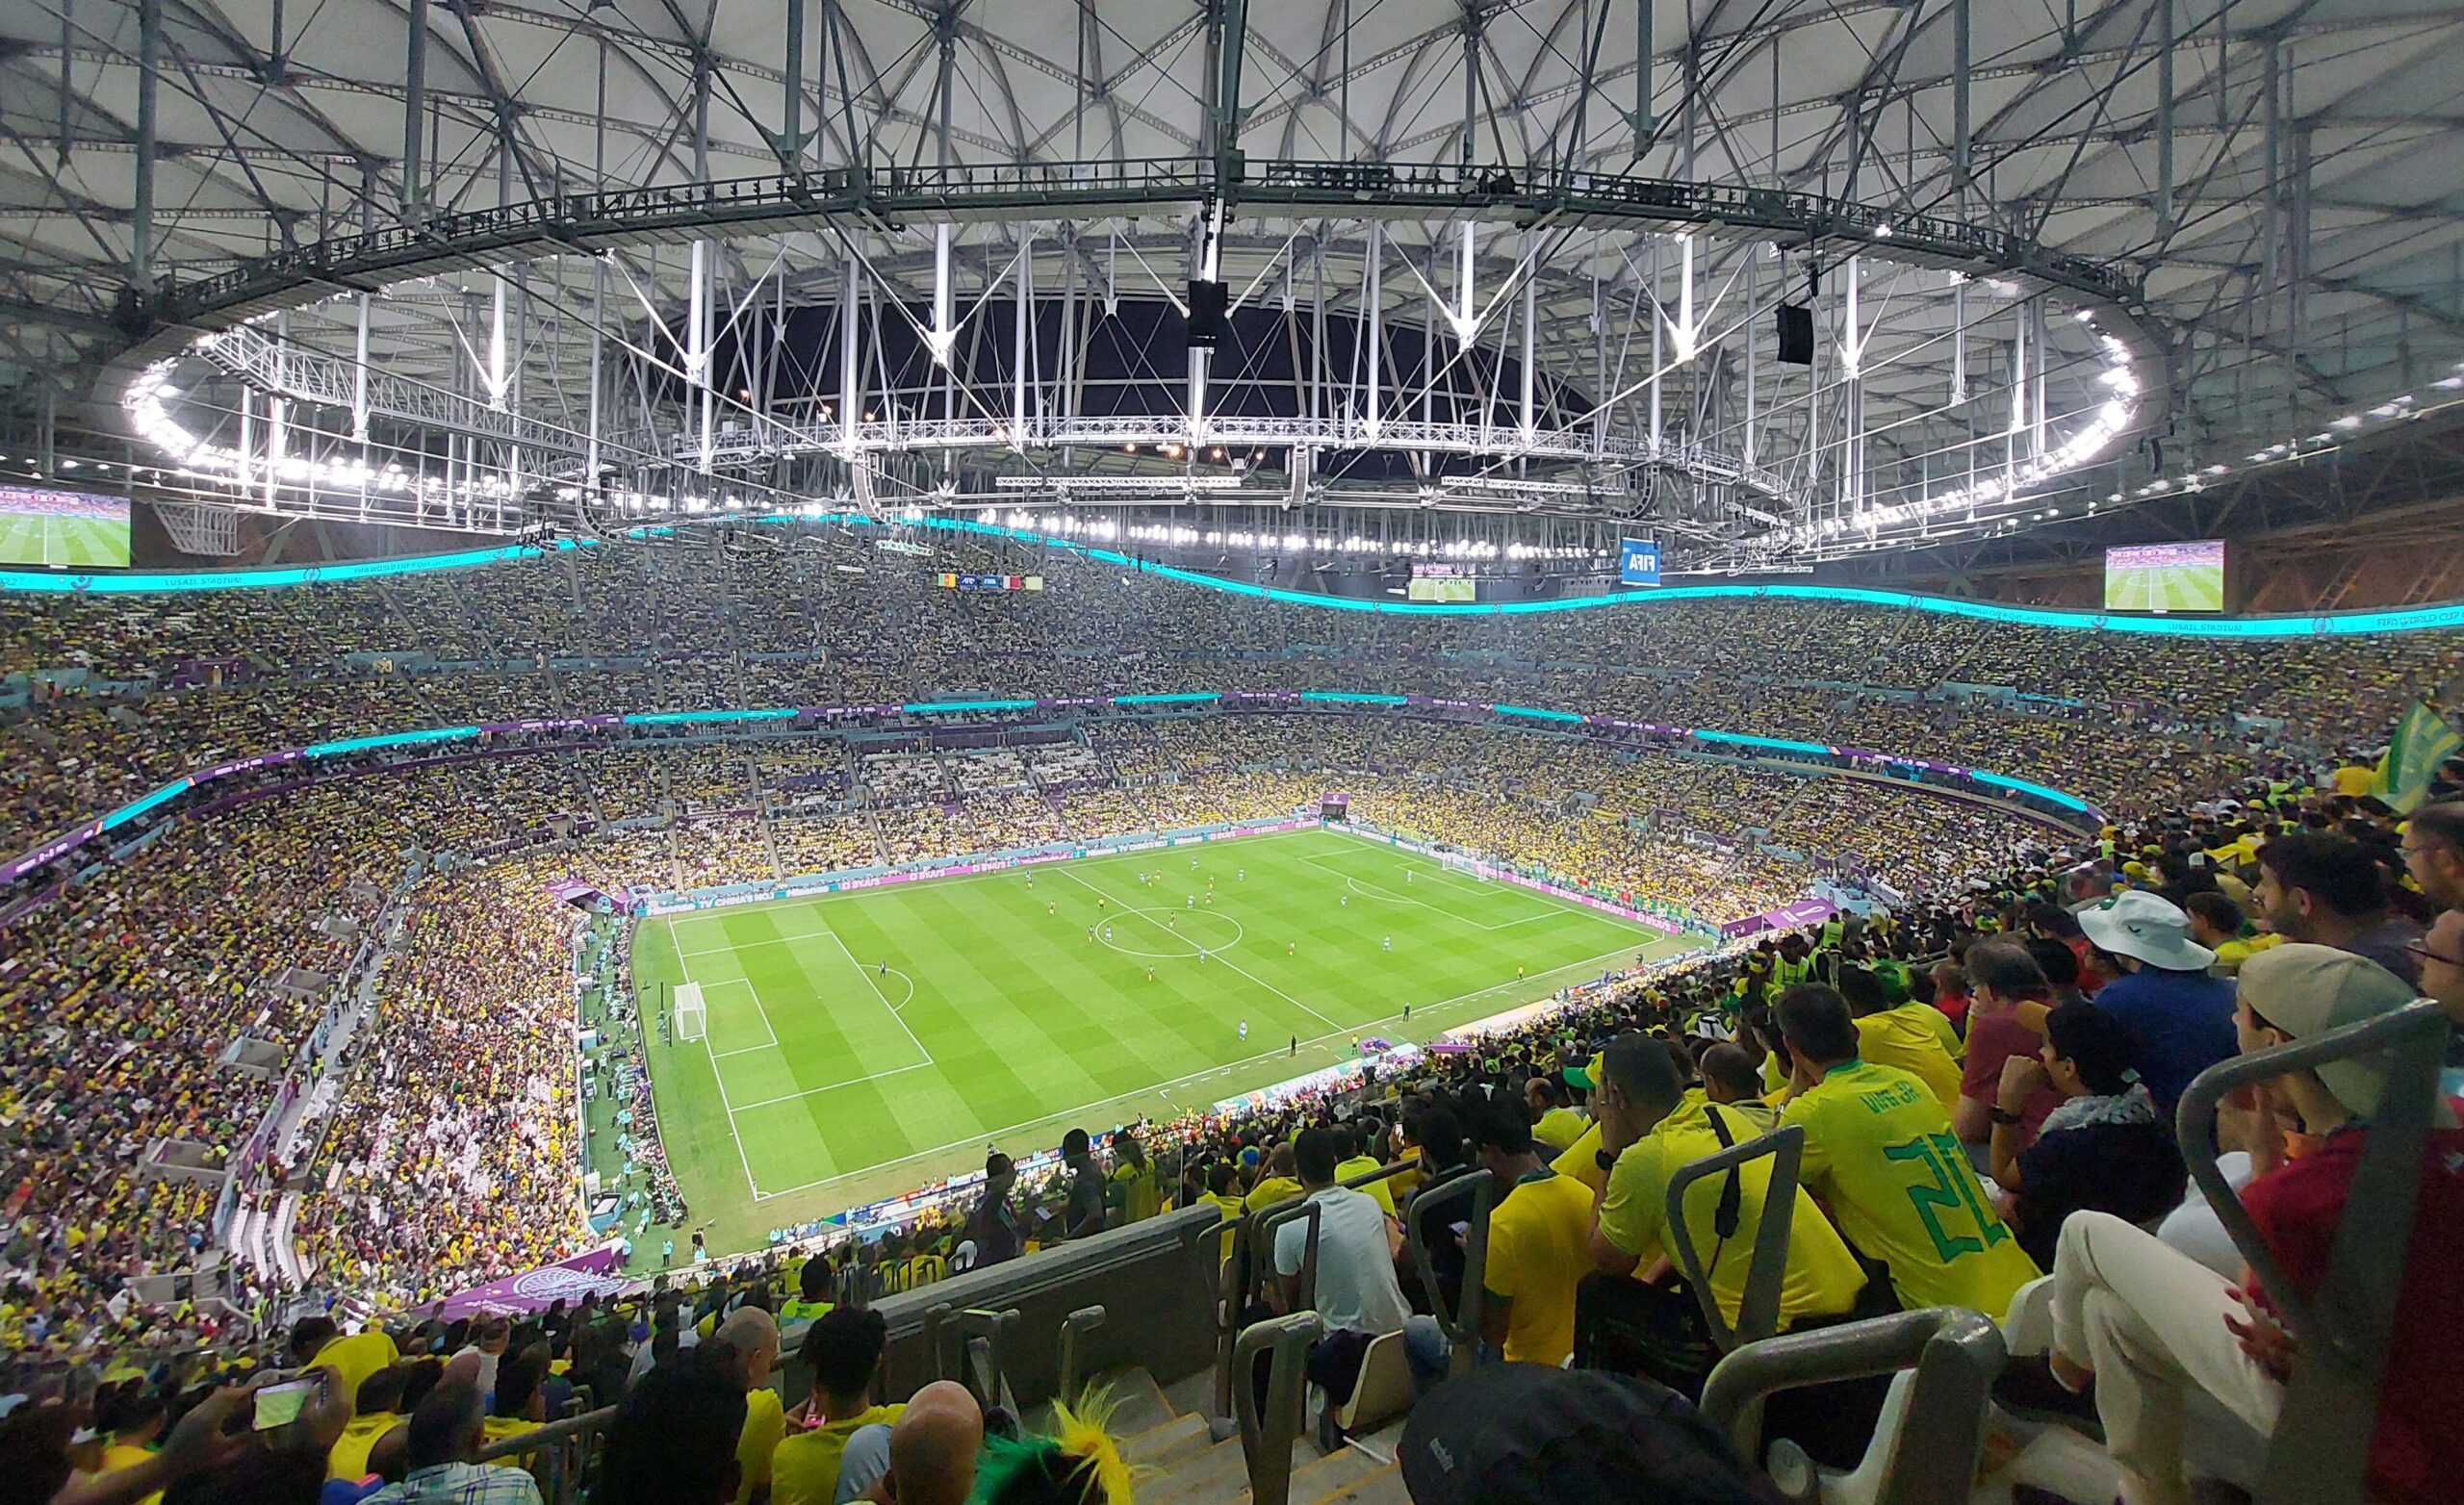 If Qatar wins the right to host rugby's Nations Championship, the games will take place at Lusail Stadium, seen here during the football World Cup in 2022